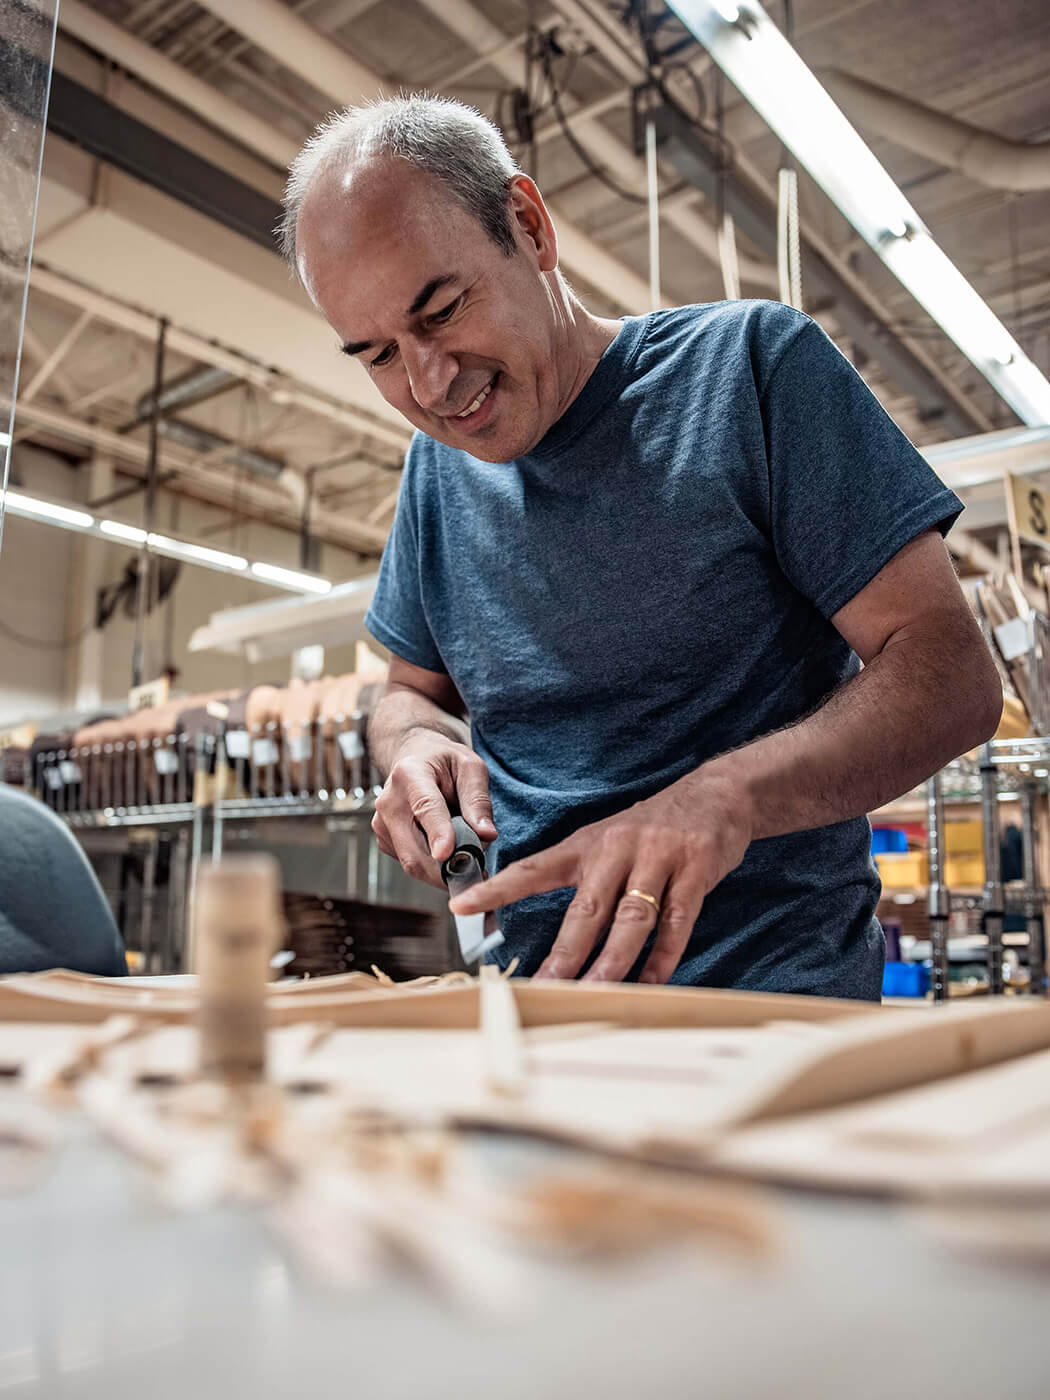 Thomas Ripsam in the factory, photo by Martin Guitars